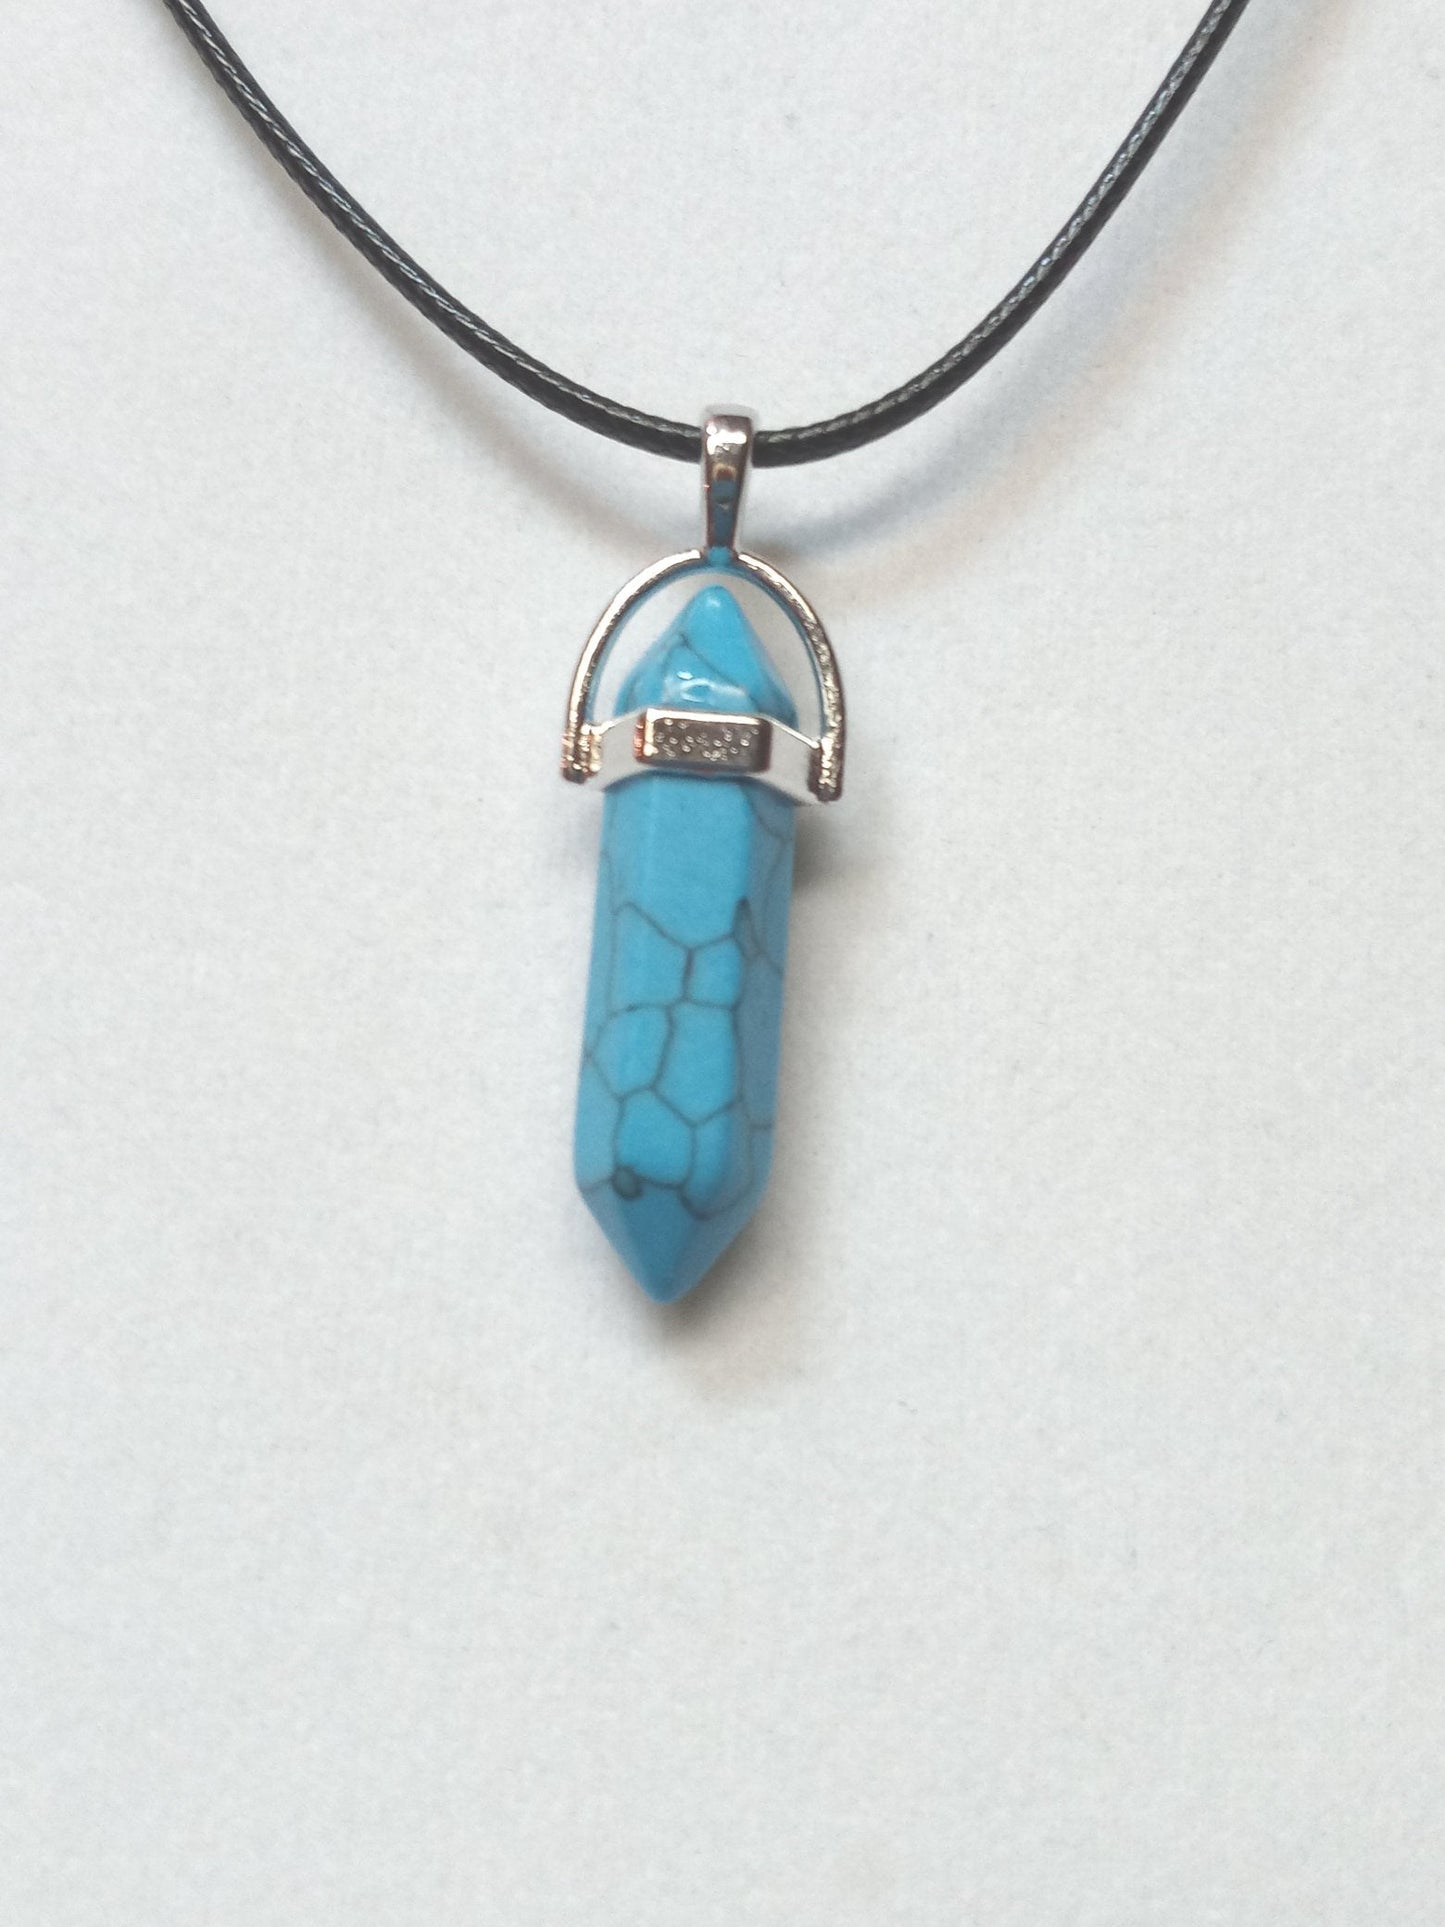 Bullet Shape Healing Stones with Black Paracord Necklace - Turquoise